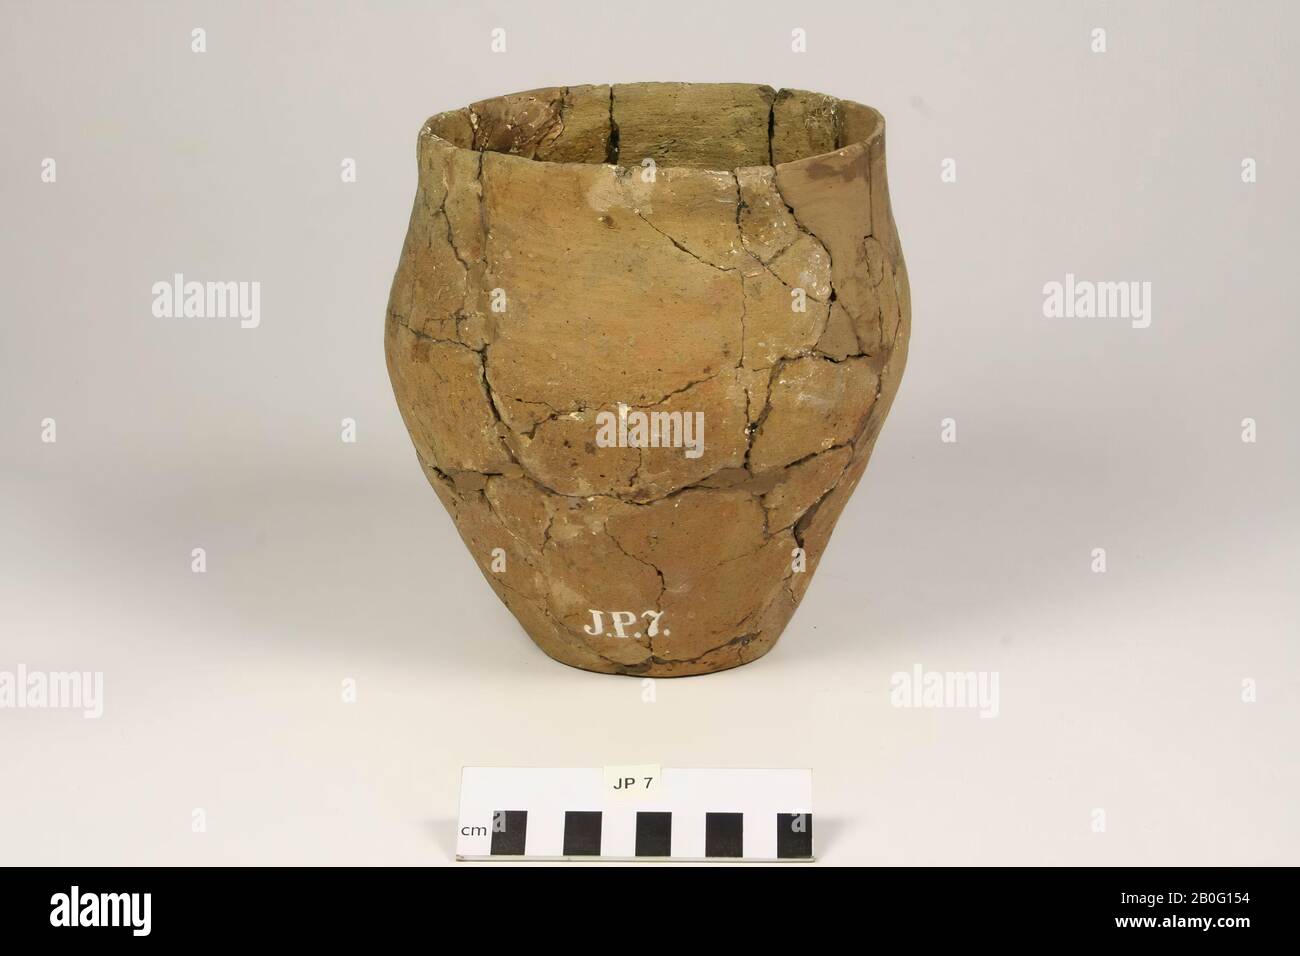 Pot of earthenware. Old bondings and additions, chips from the edge, pot, earthenware, h: 18.2 cm, diam: 16.8 cm, prehistory, Germany, North Rhine-Westphalia Stock Photo